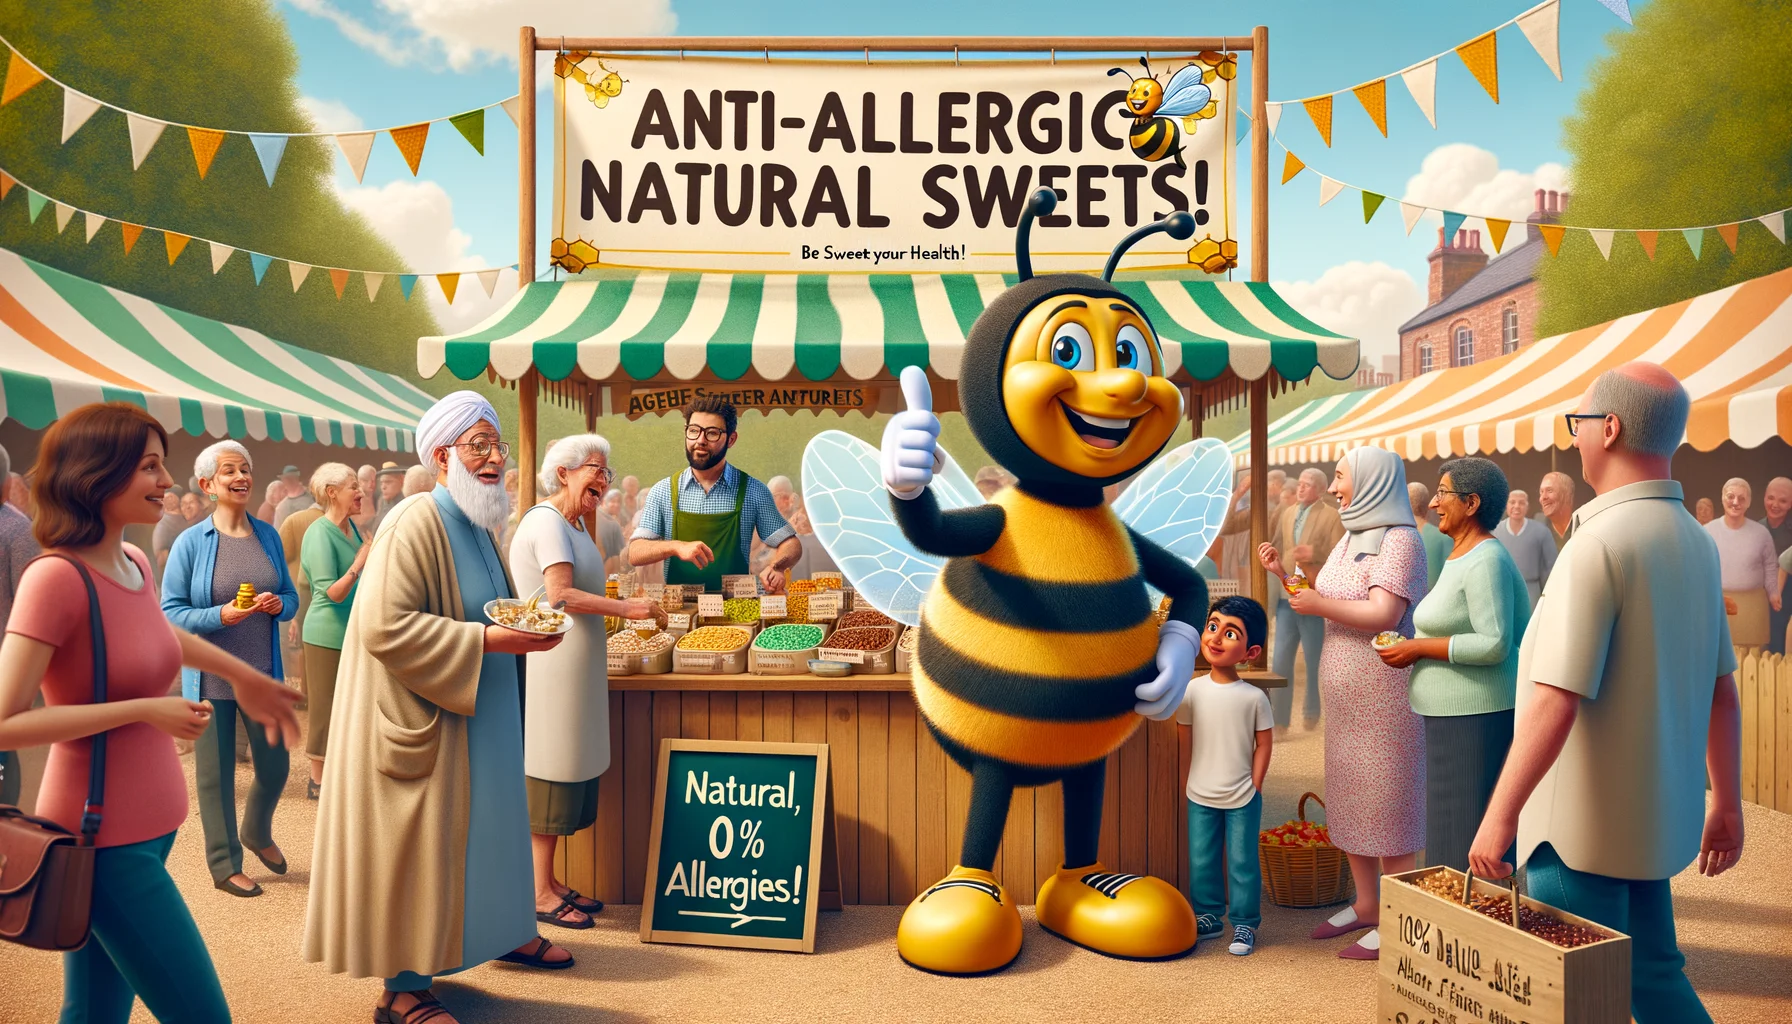 Imagine a humorous and lifelike scene taking place at an open-air farmer's market on a bright sunny day. A stall dedicated to 'Anti-Allergic Natural Sweets' stands out amidst the hustle and bustle. A diverse crowd of people including a Middle-Eastern woman, an elderly Hispanic man, and a young Caucasian boy enjoy sampling the delicious, health-conscious treats. An oversized, vibrantly colored honeybee mascot, poised happily with thumbs up, stands next to the stall. A large banner proclaims 'Be sweet to your health!' flutters in the gentle breeze overhead. The scene is completed with a small blackboard sign advertising '100% Natural, 0% Allergies!'.